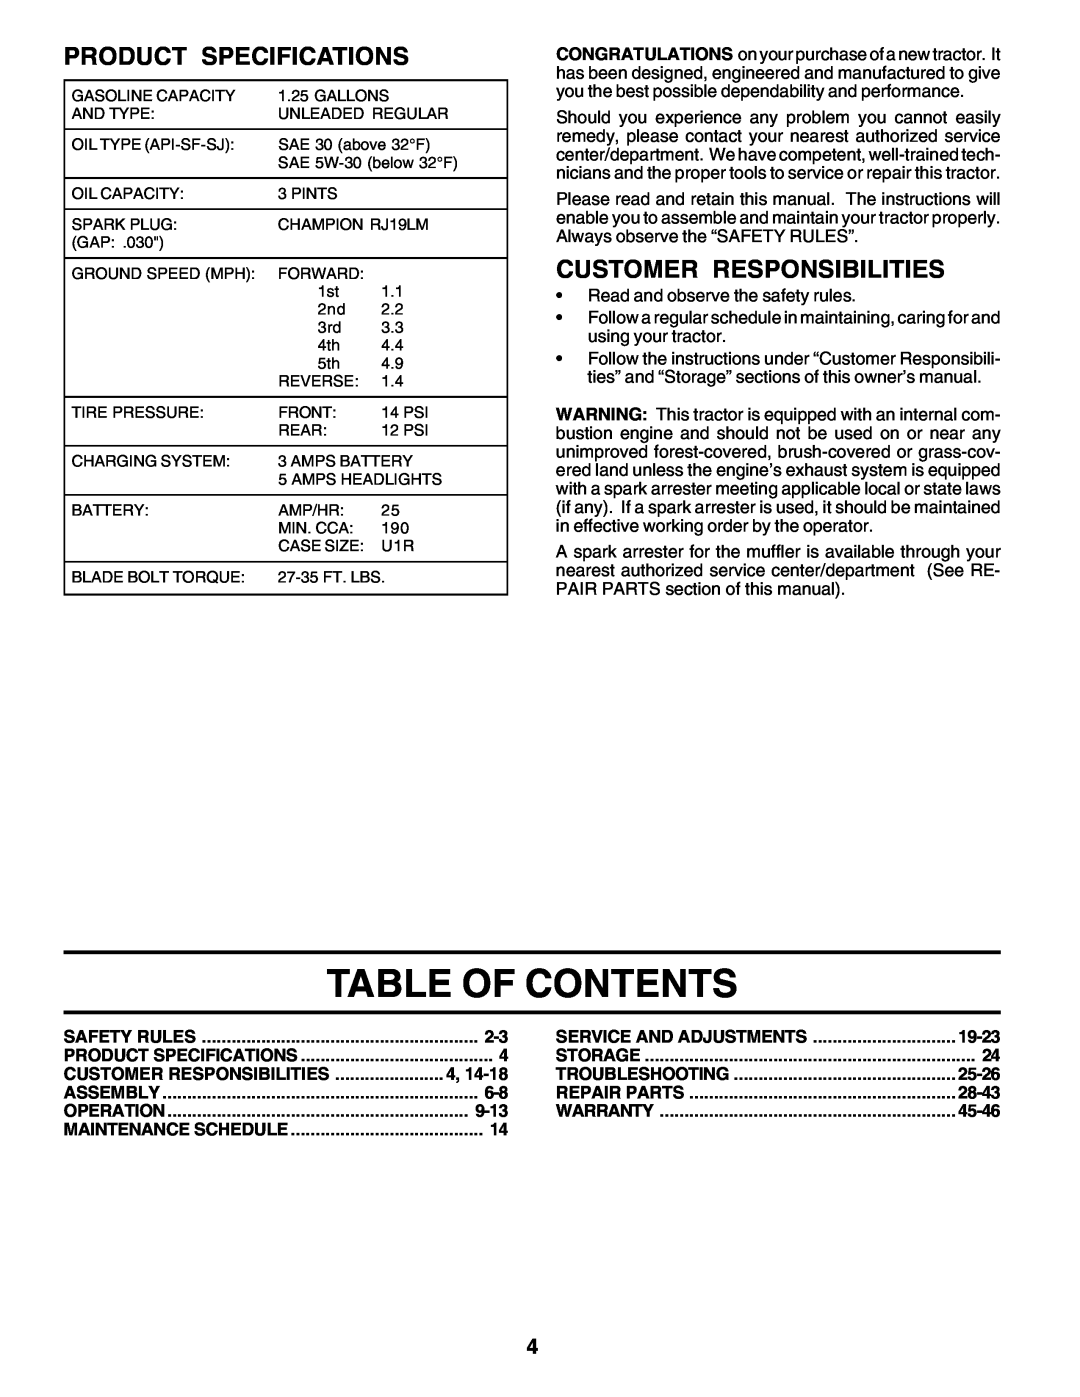 Weed Eater WE12538J manual Table Of Contents, Product Specifications, Customer Responsibilities 